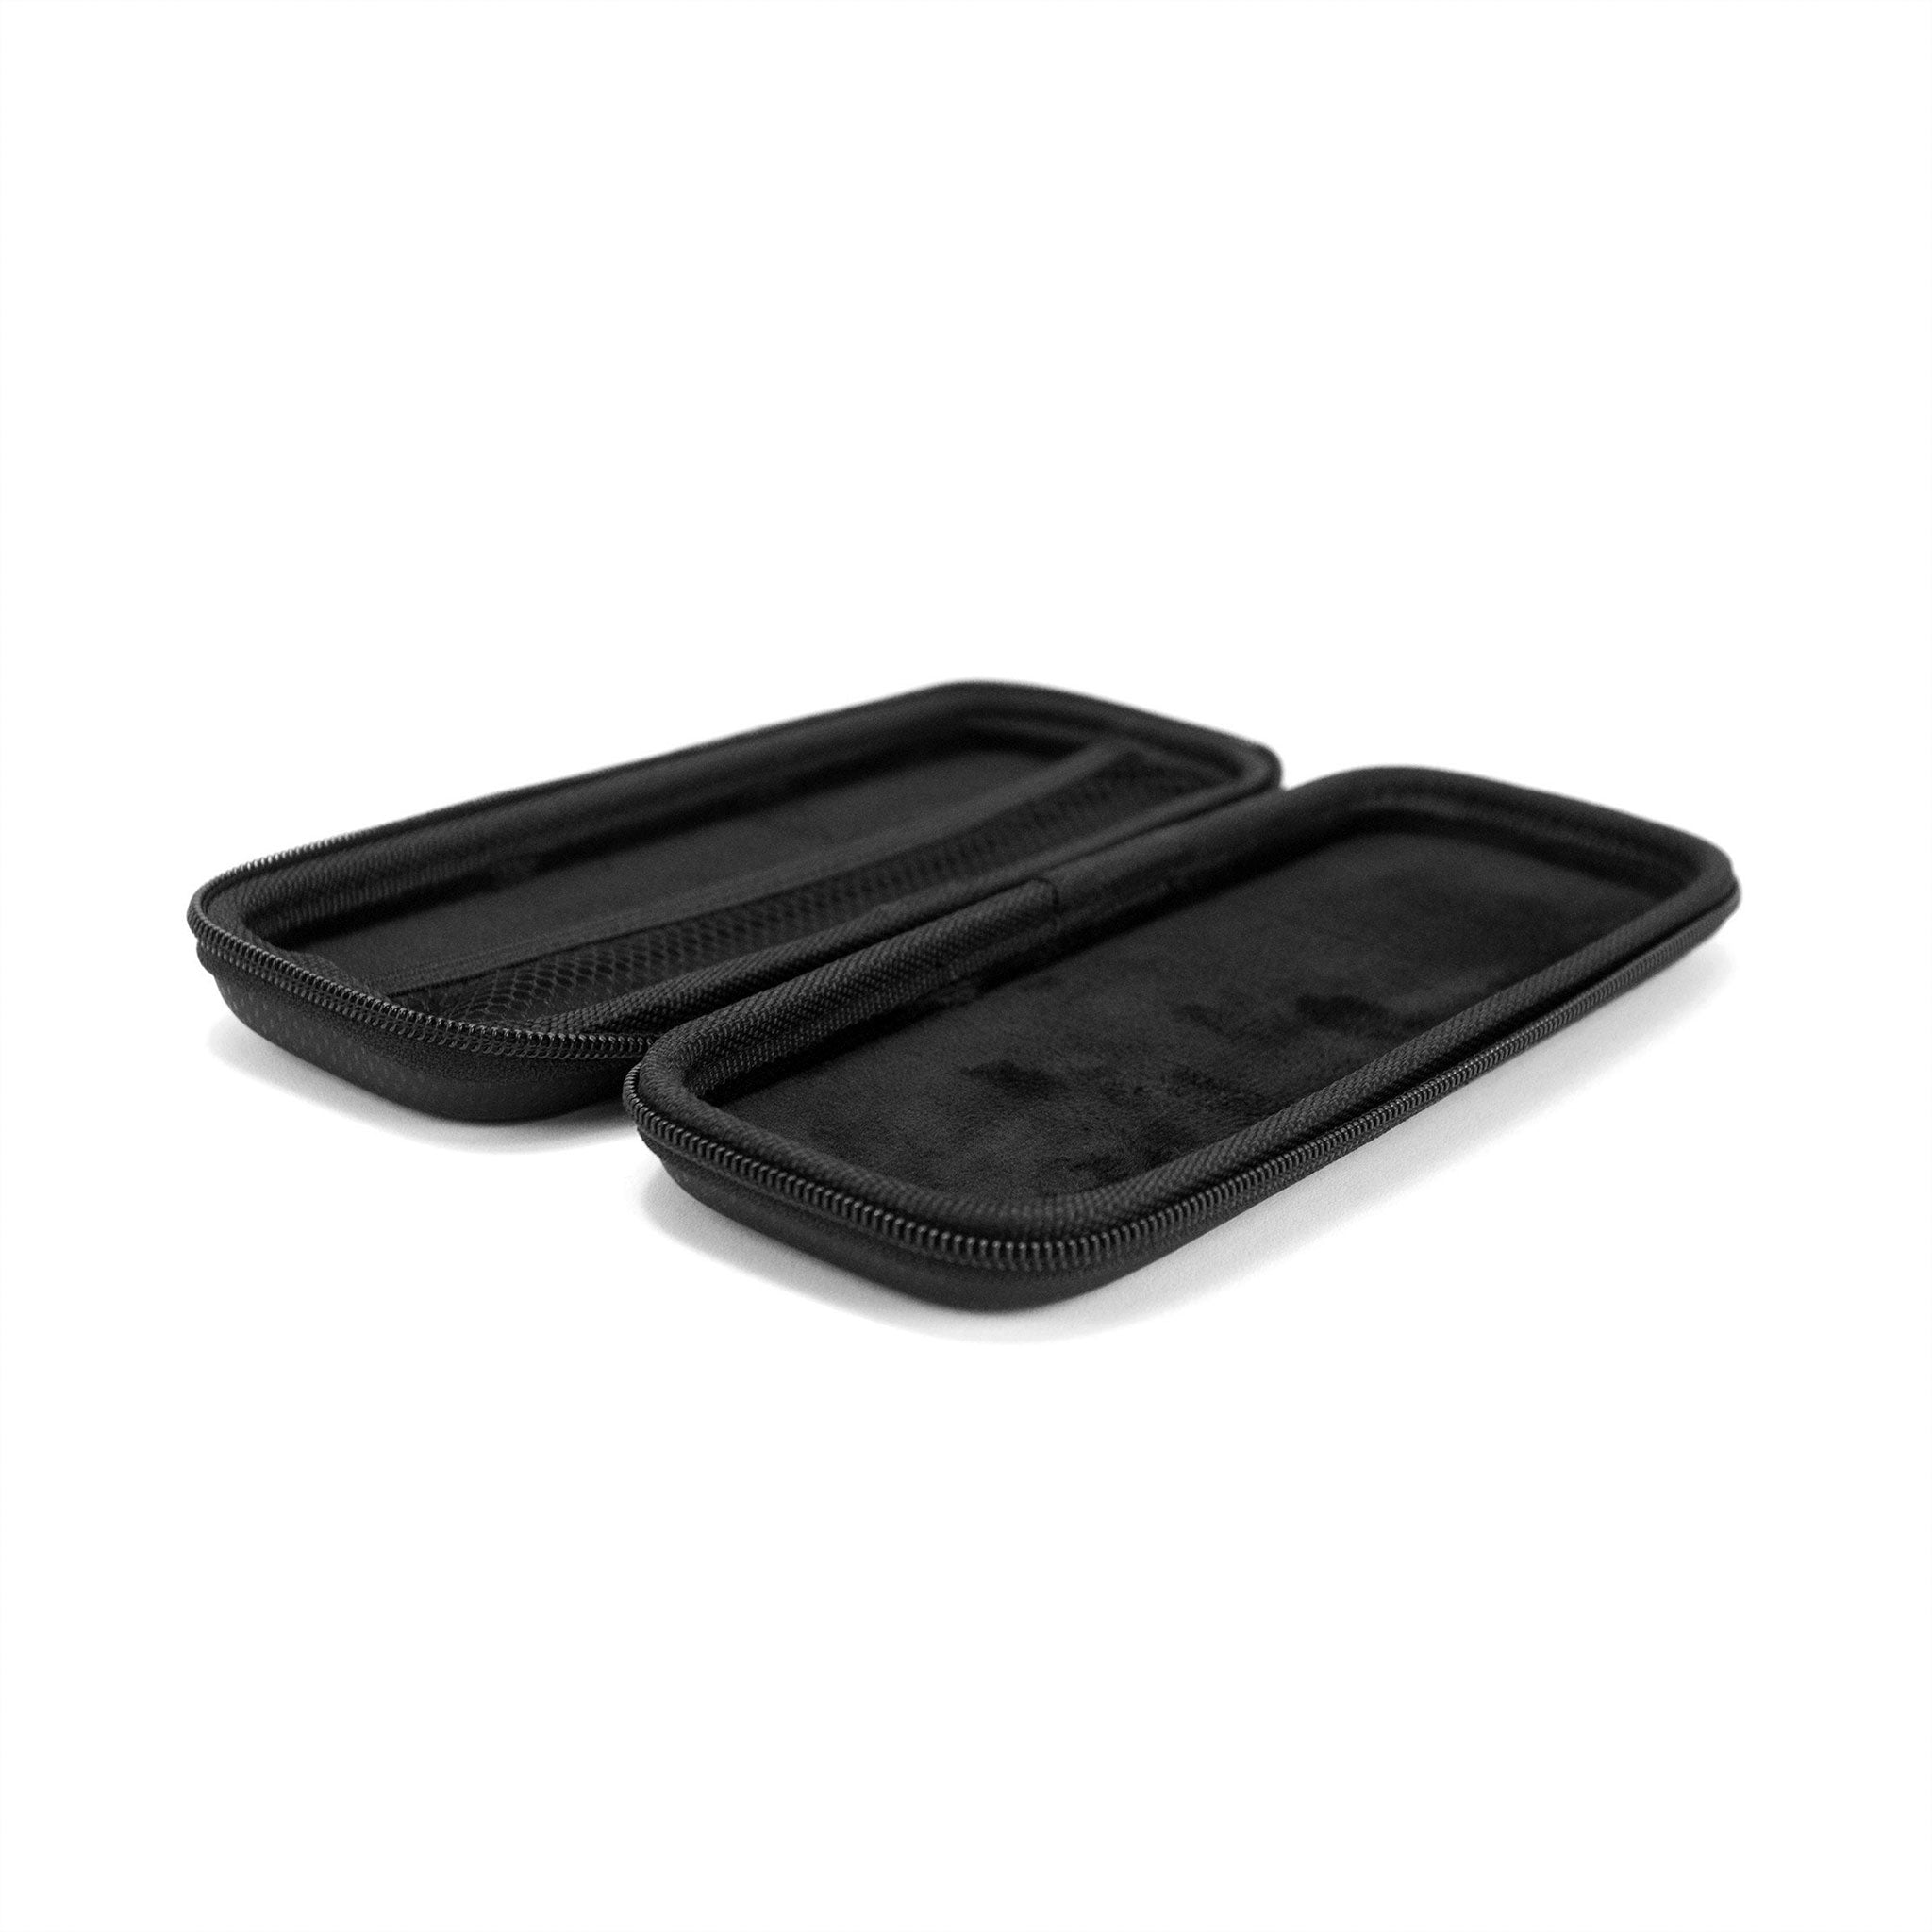 GLIDE Case For The Zoom H6, H5 or H4n